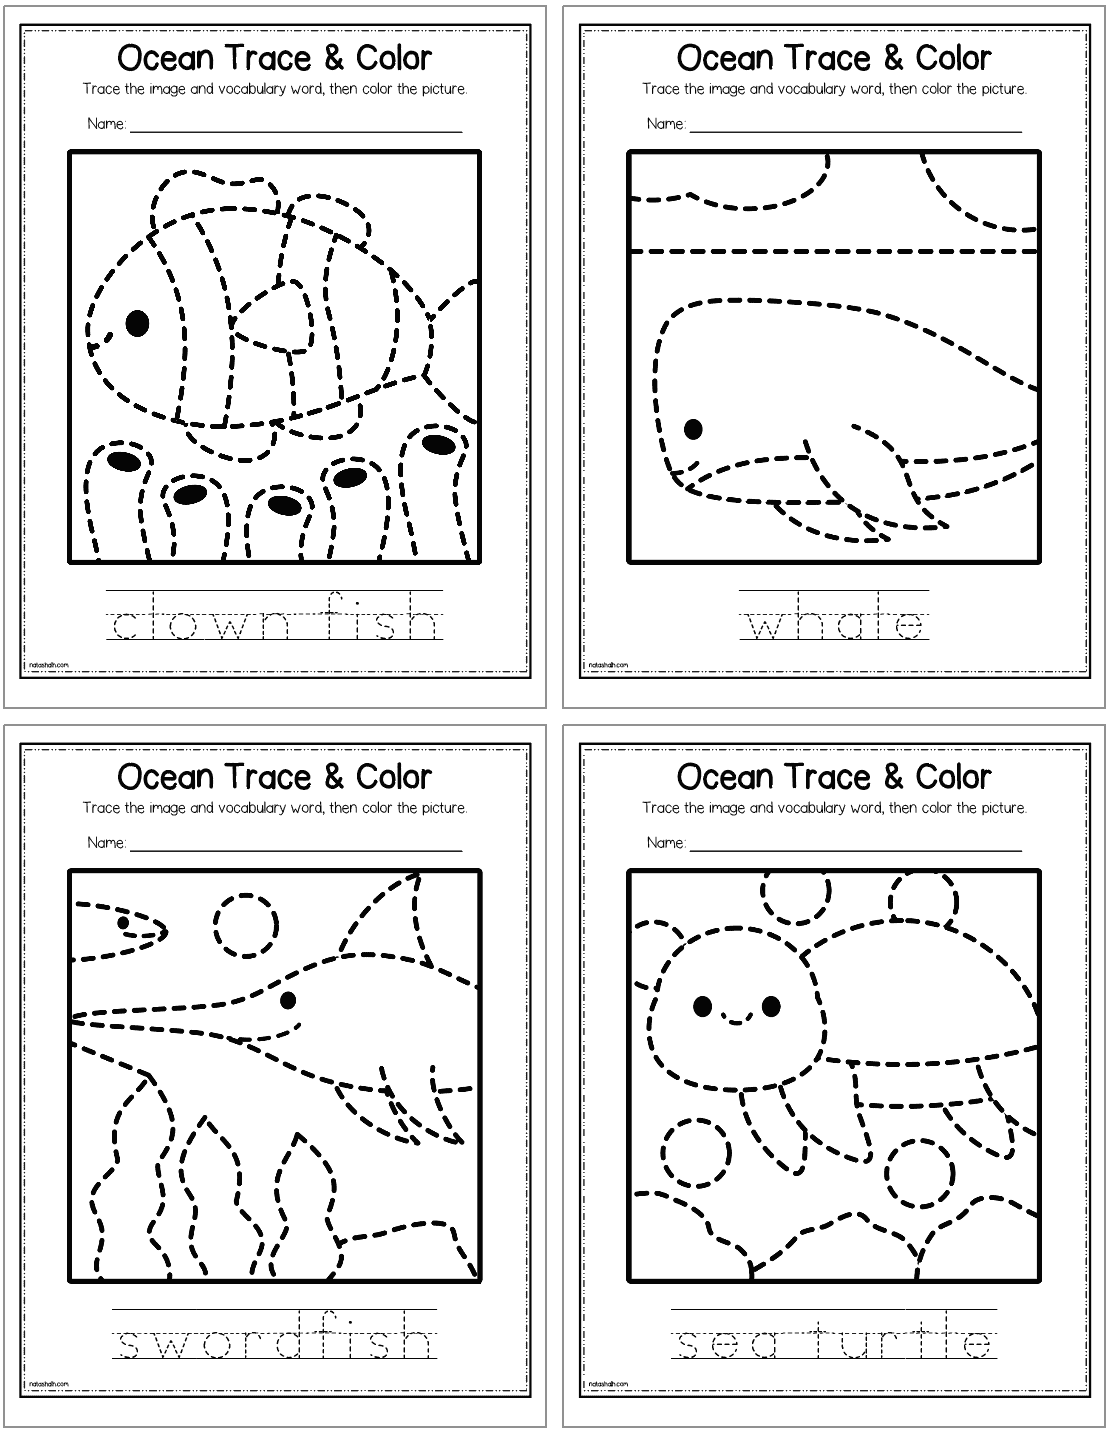 A preview of four ocean animal themed tracing and coloring pages for kids. Animals include: clown fish, whale, swordfish, and sea turtle